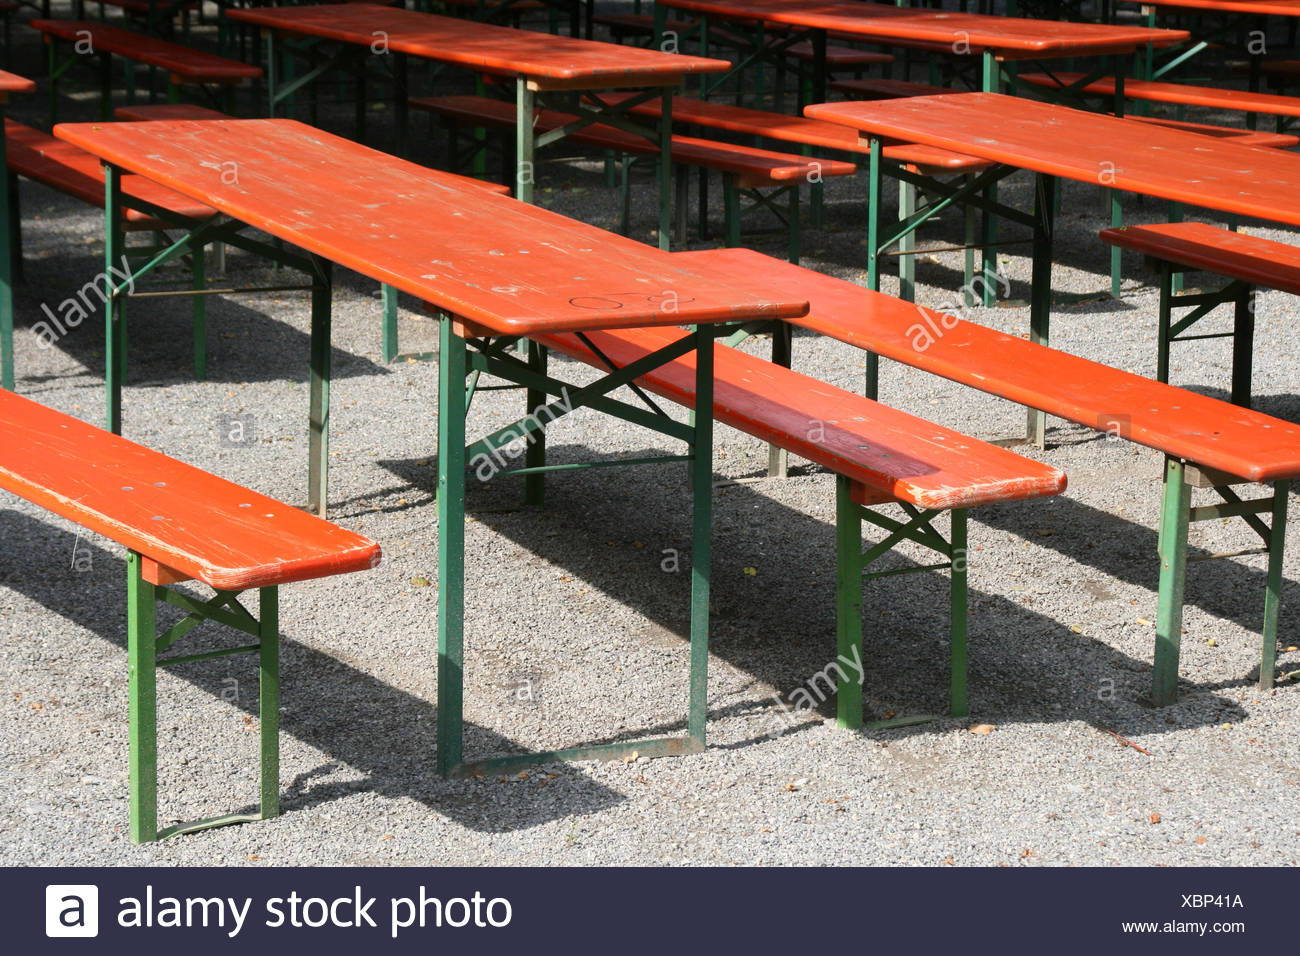 Bavaria Benches Beer Garden Tables Day Of Rest Shaddow Shadow Inn